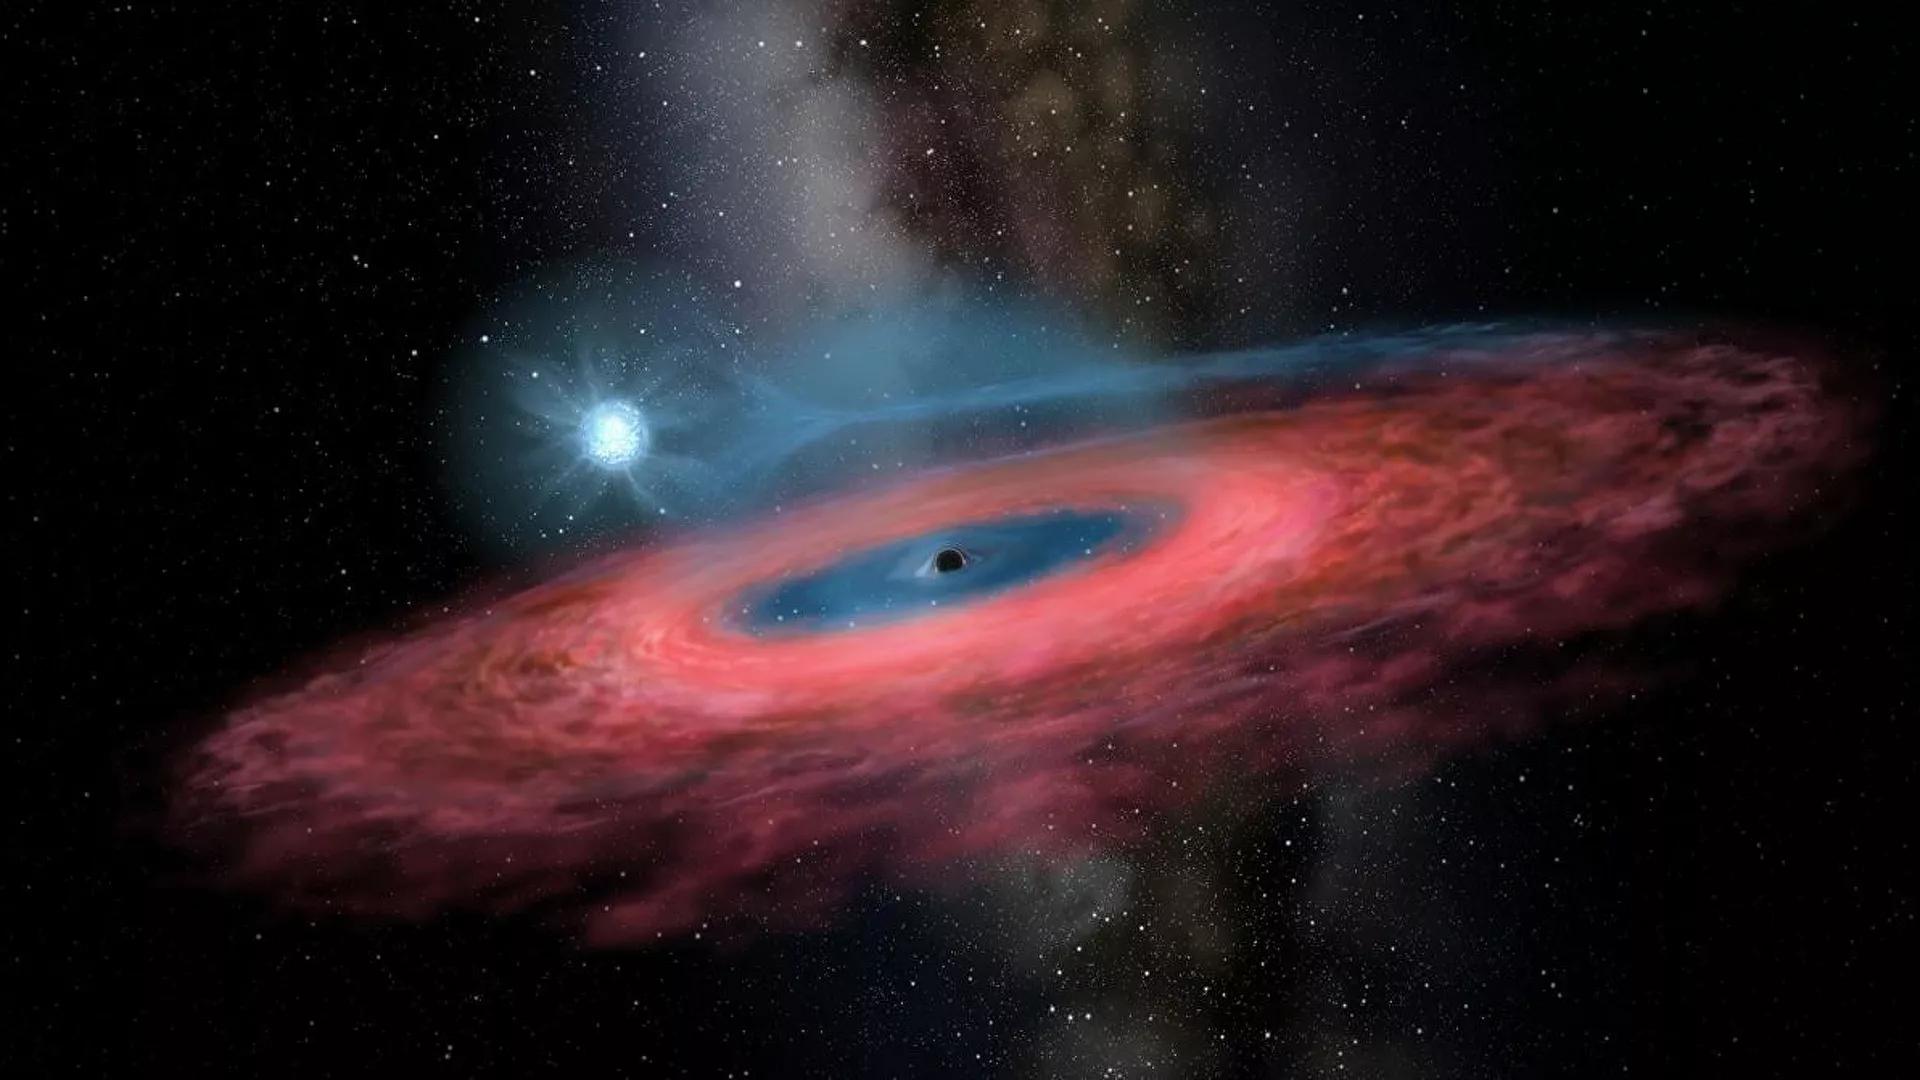 Does Discovery of Black Hole Hiding in Star Cluster Outside of Our Galaxy Prove Einstein's Theory?